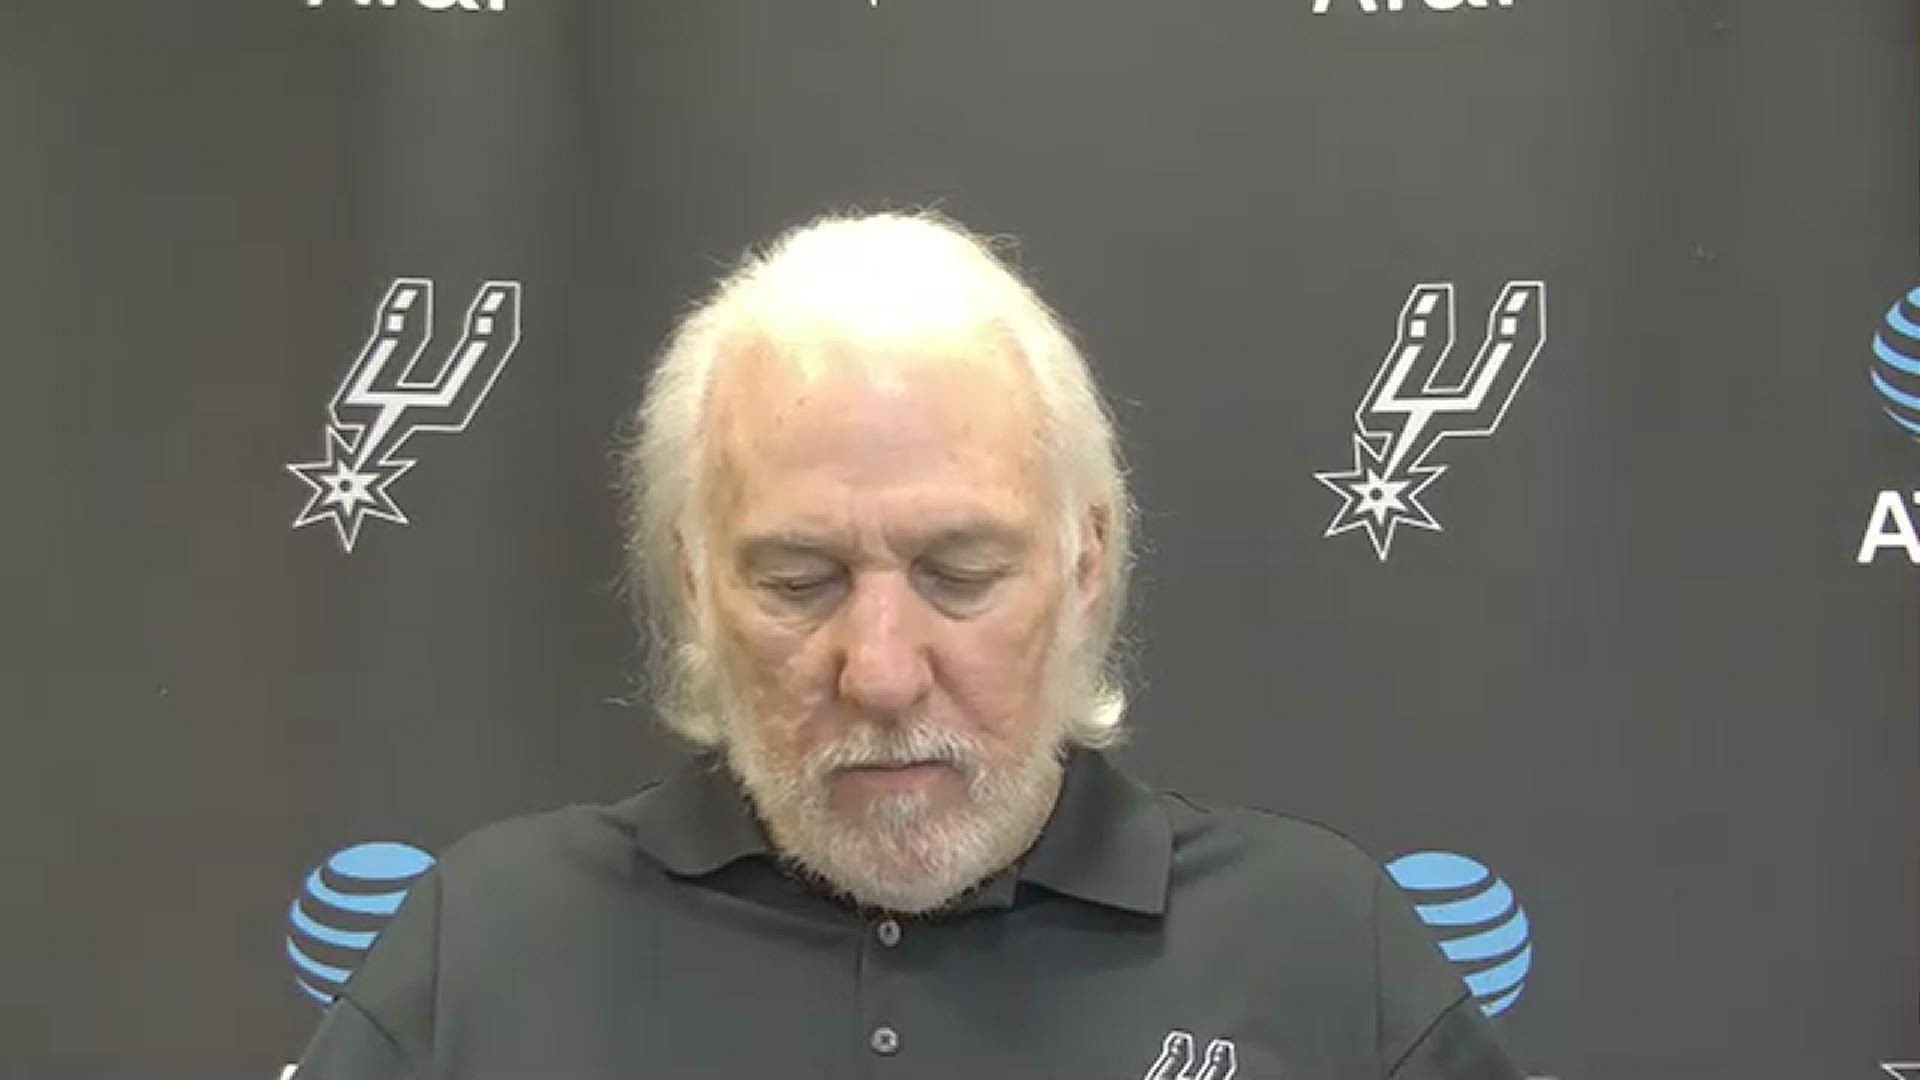 Popovich said that DeMar would start tonight, but fully supported his decision to grieve the loss of his father away from the team.